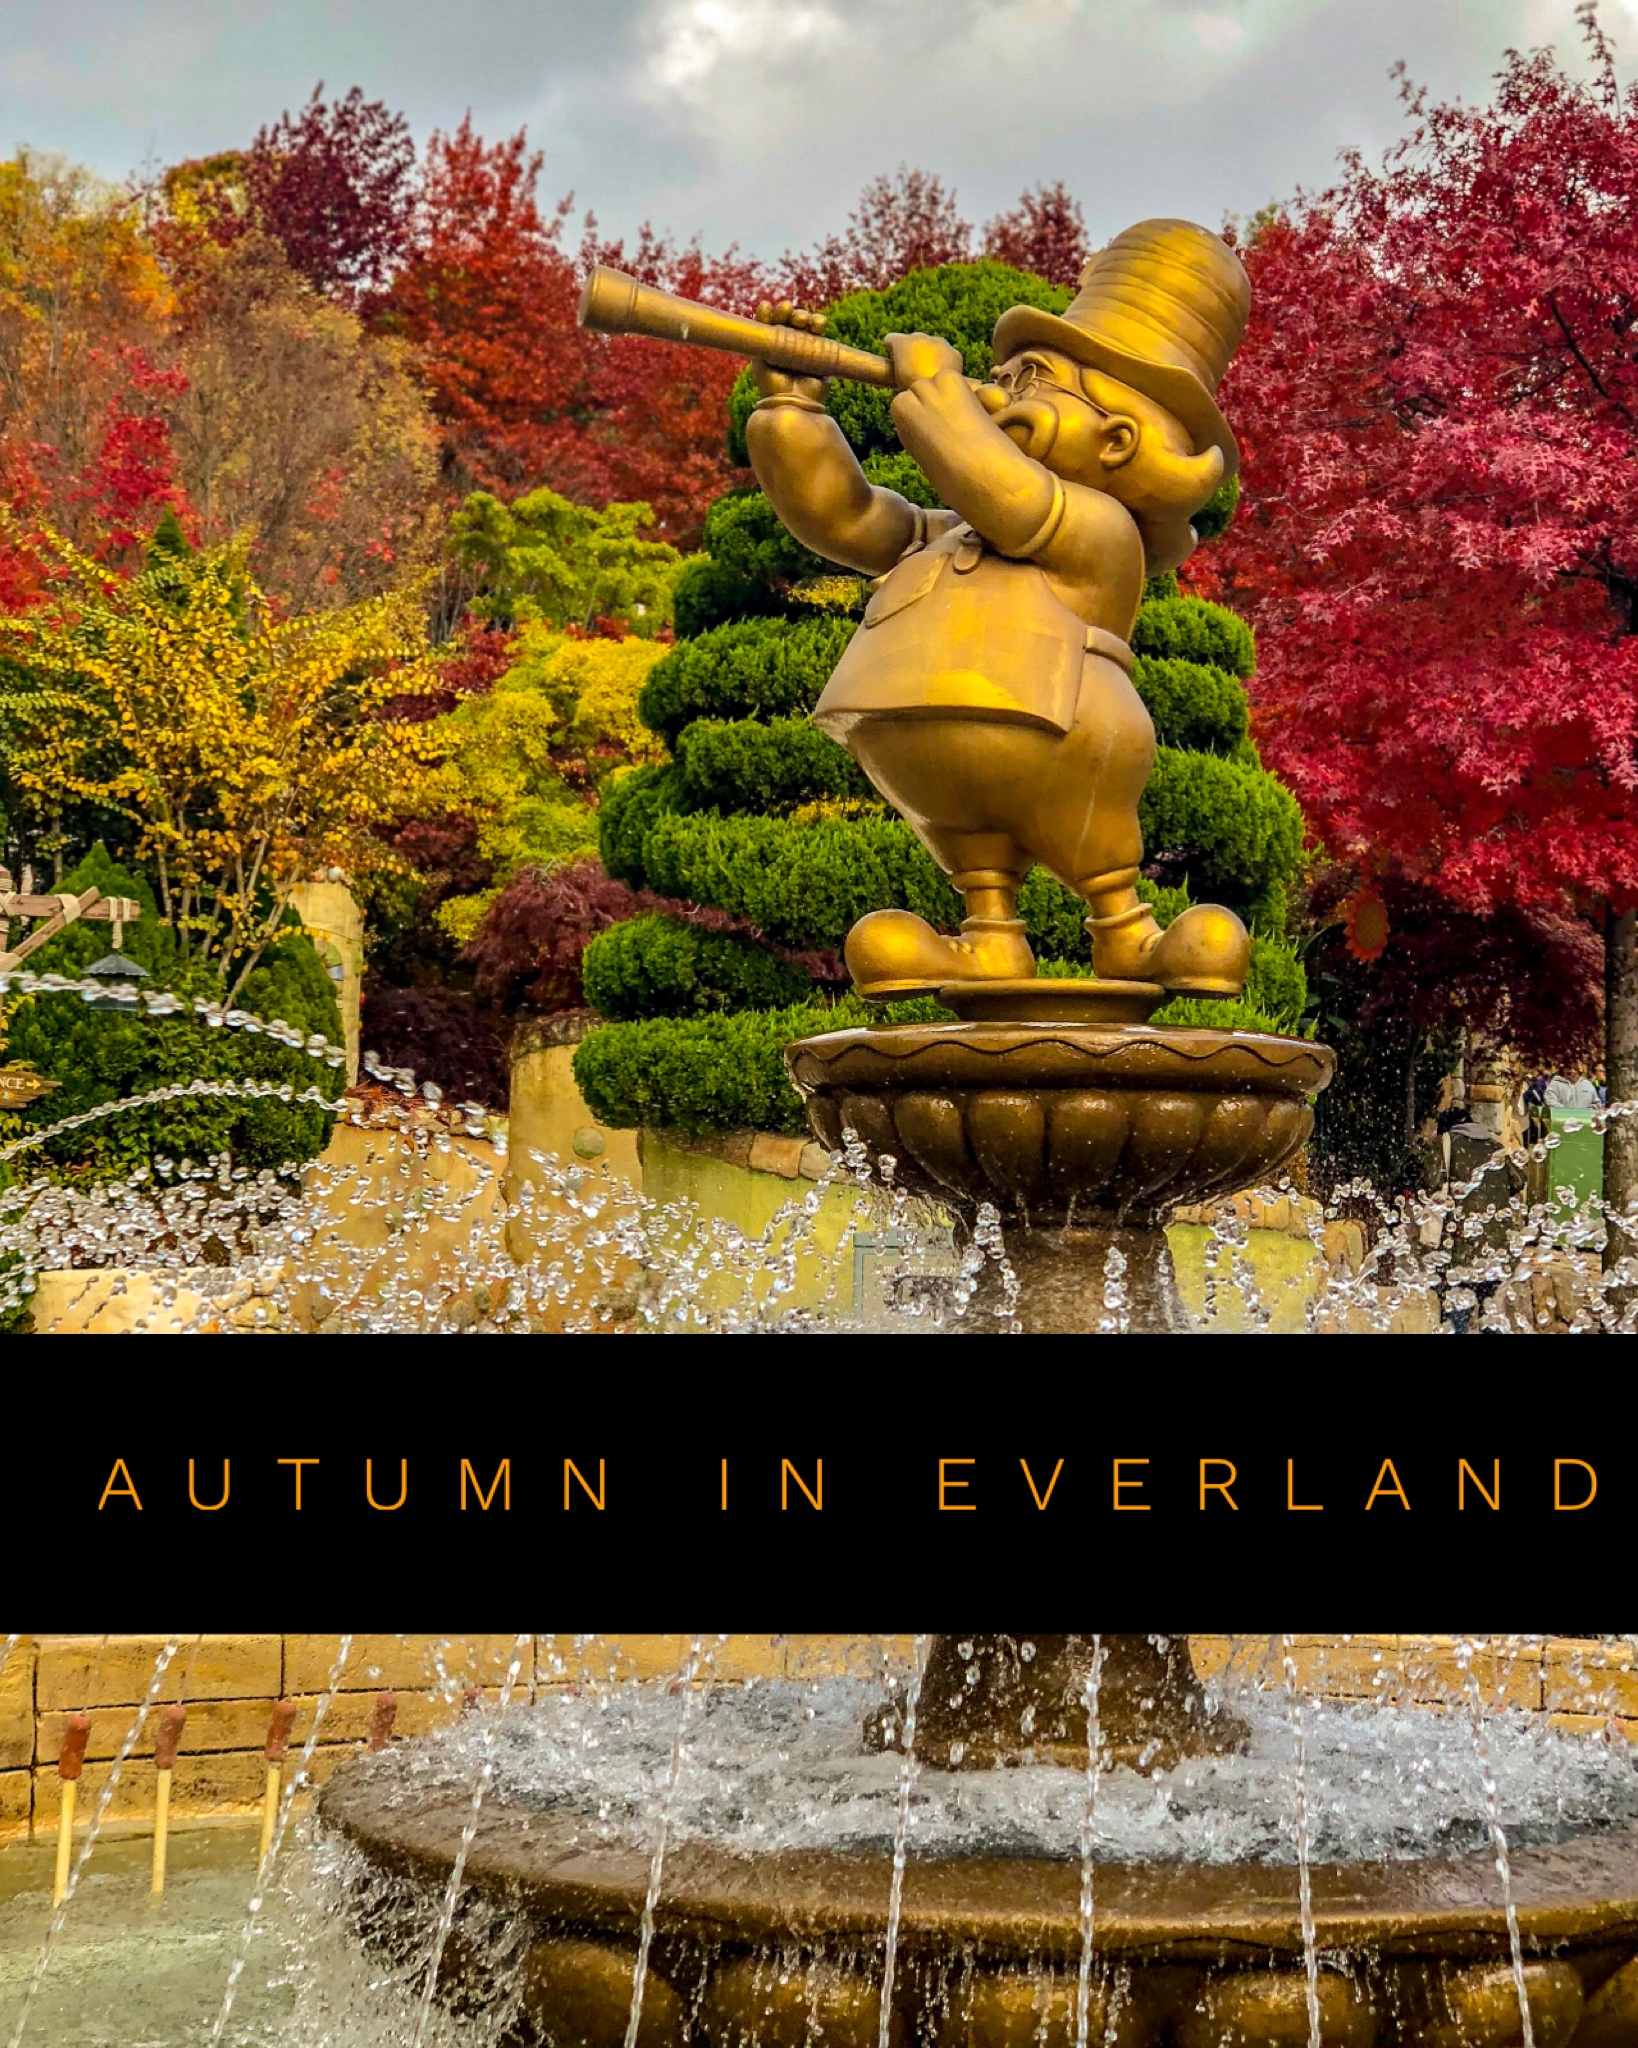 An Autumn Day in Everland